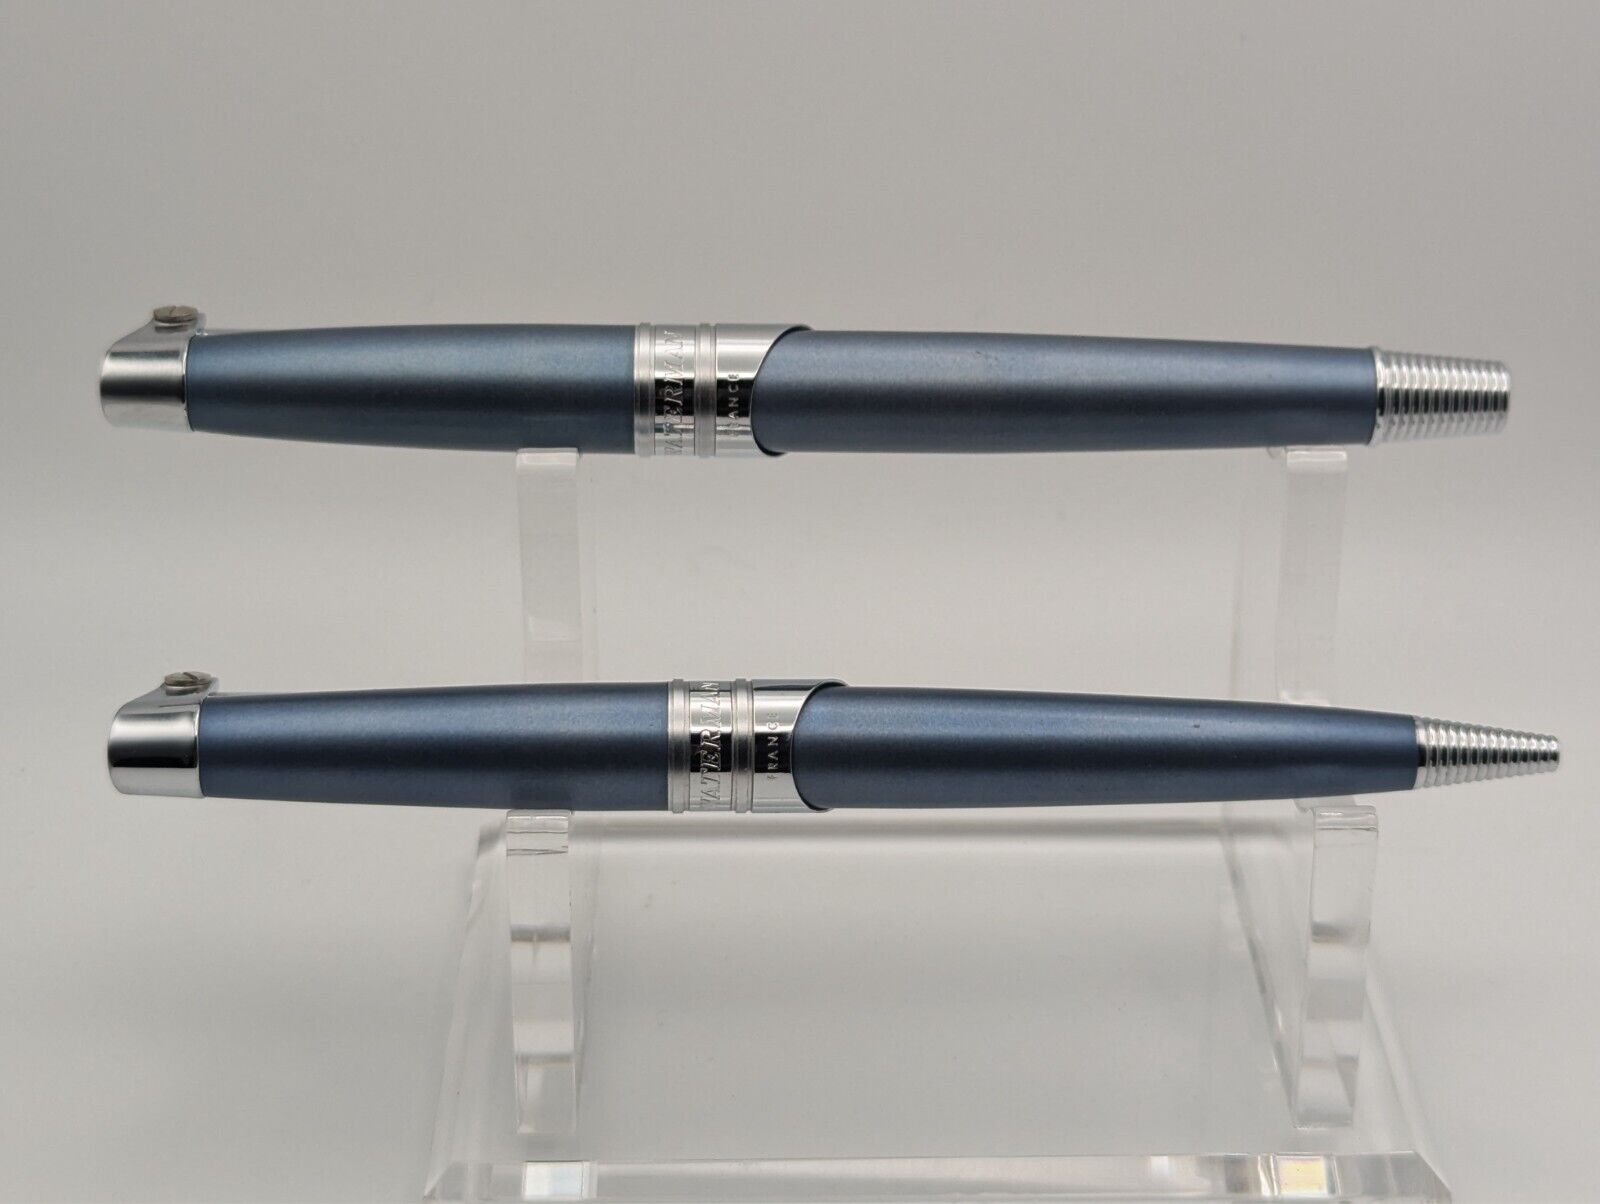 Waterman Harley Davidson Blue Fountain and Ballpoint Pen Set (Pre-Owned)